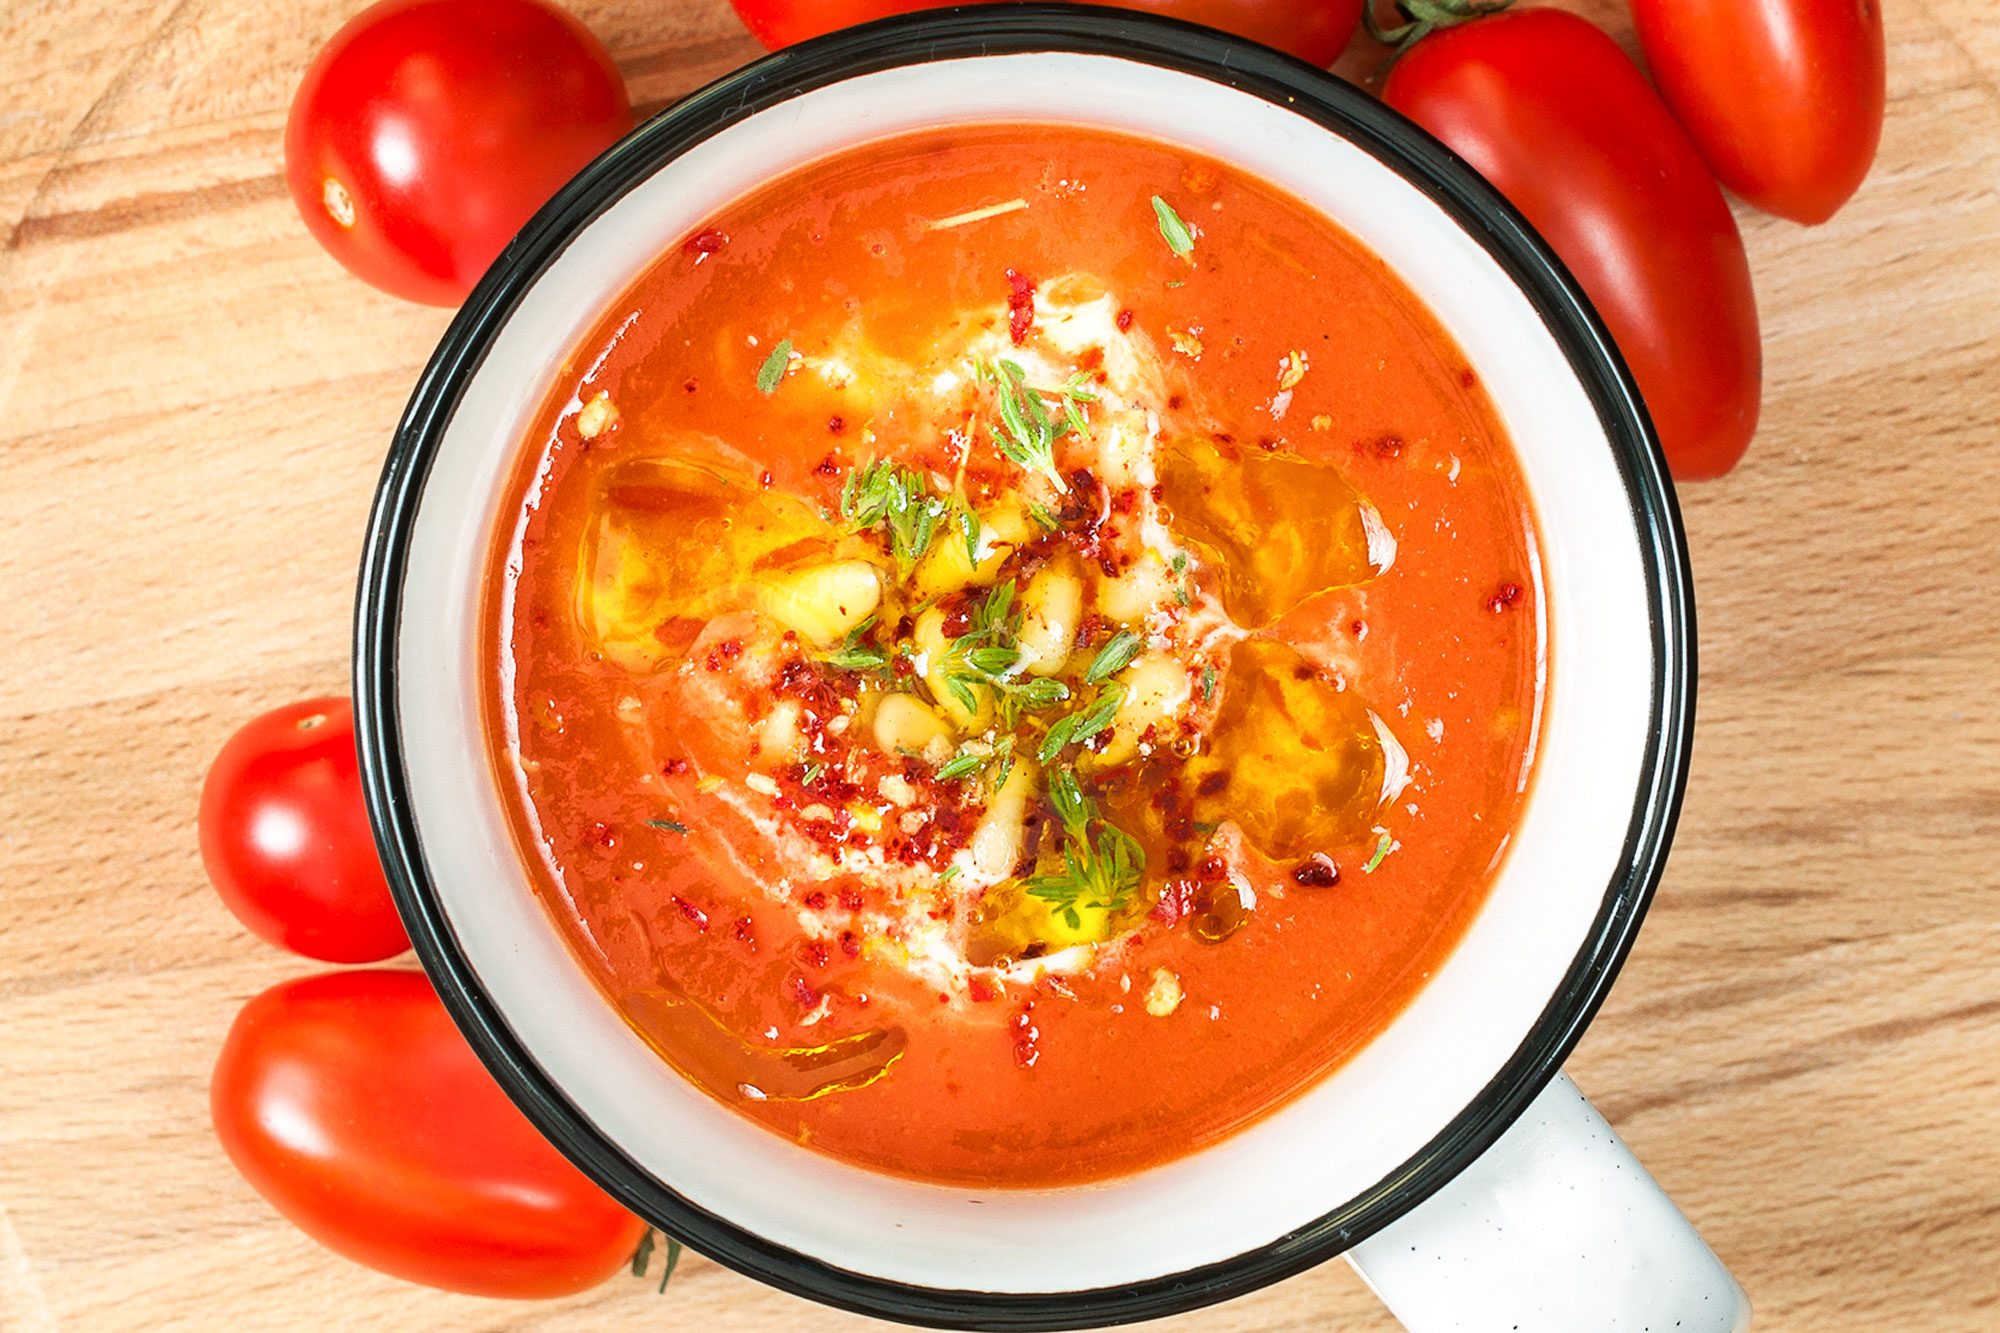 https://www.tasteofhome.com/wp-content/uploads/2021/10/Tomato-Soup-and-Tomatos-on-Wooden-Surface-GettyImages-485478744_KSedit.jpg?fit=700%2C467